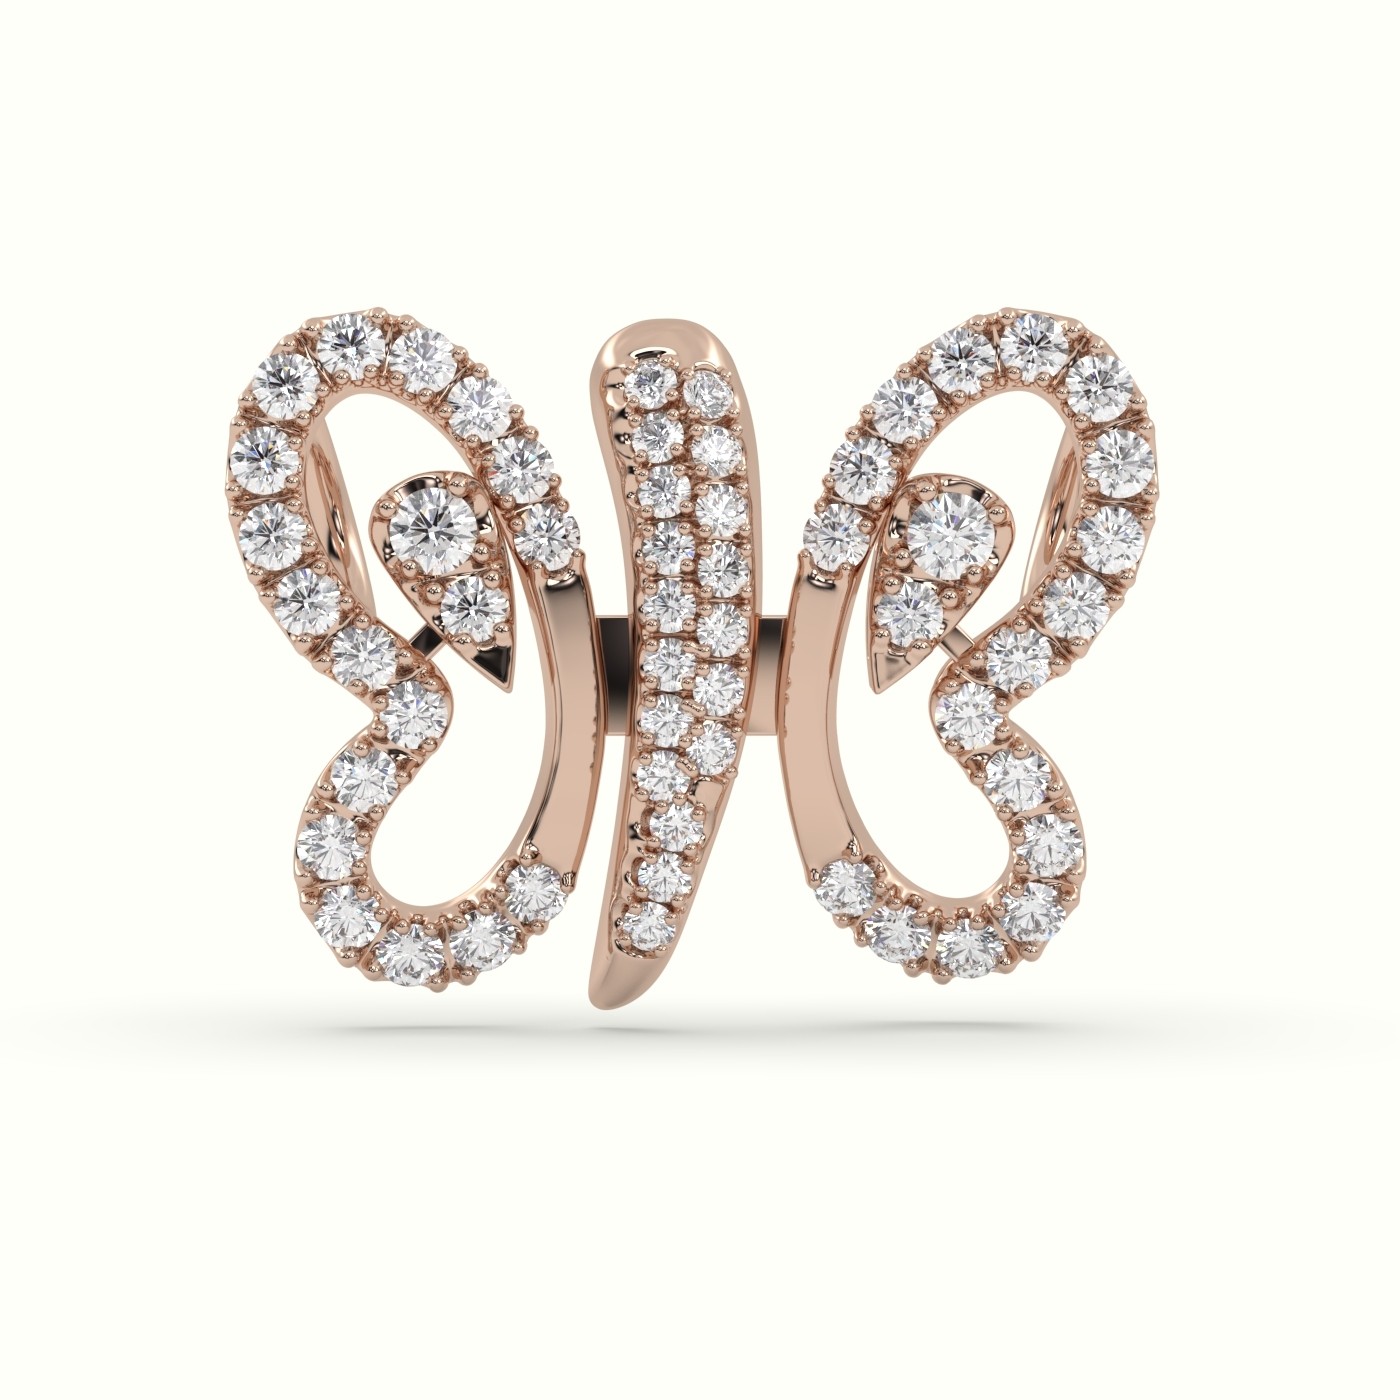 18k rose gold butterfly pendant set with total 1 carat round diamonds